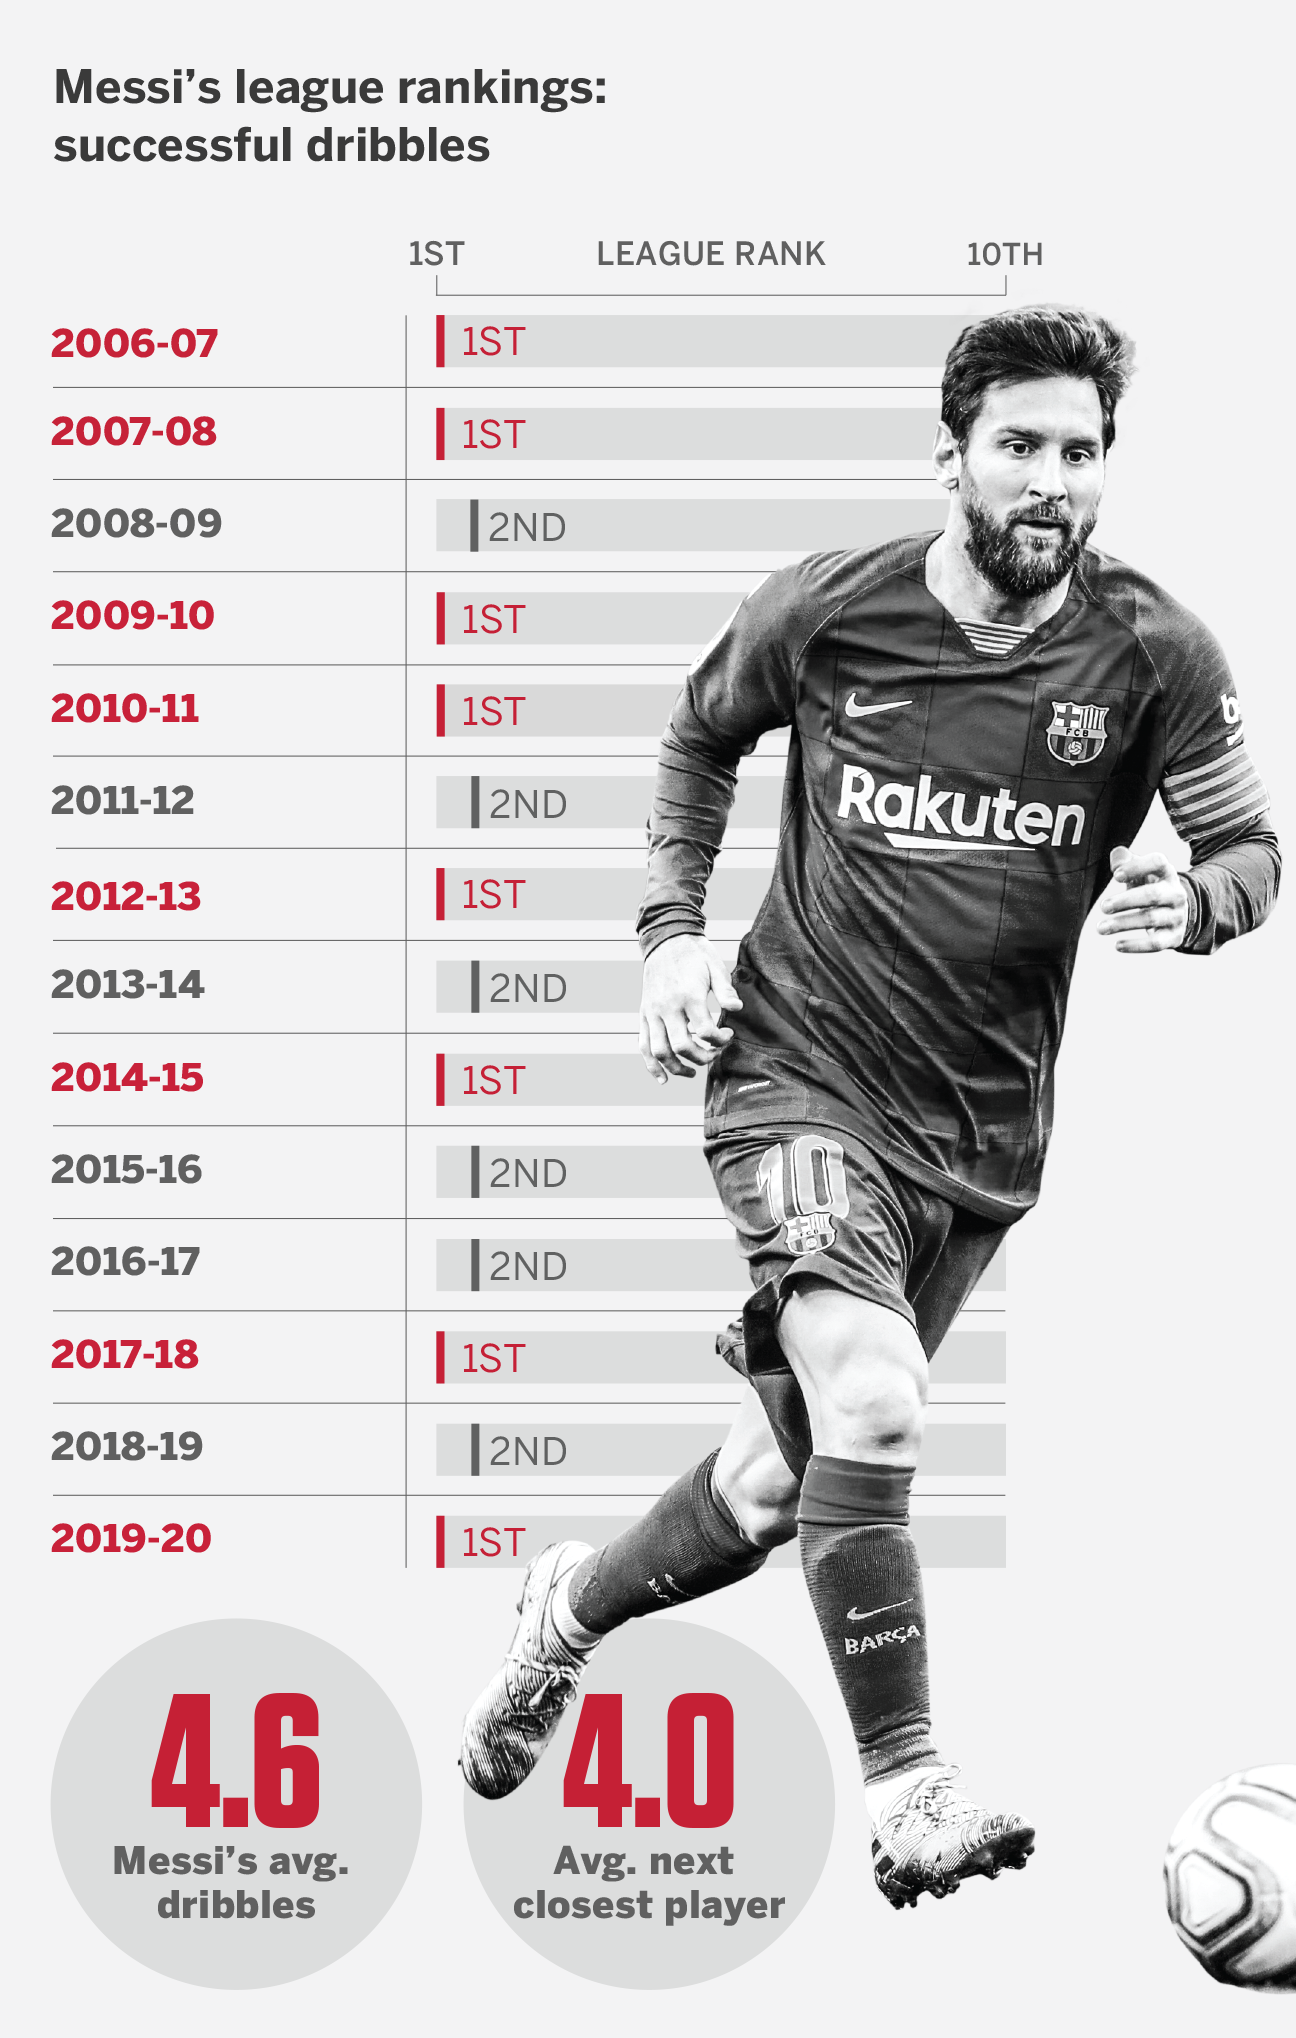 Cristiano Ronaldo vs Lionel Messi head-to-head Champions League record  after pair's worst season in Europe since 2005